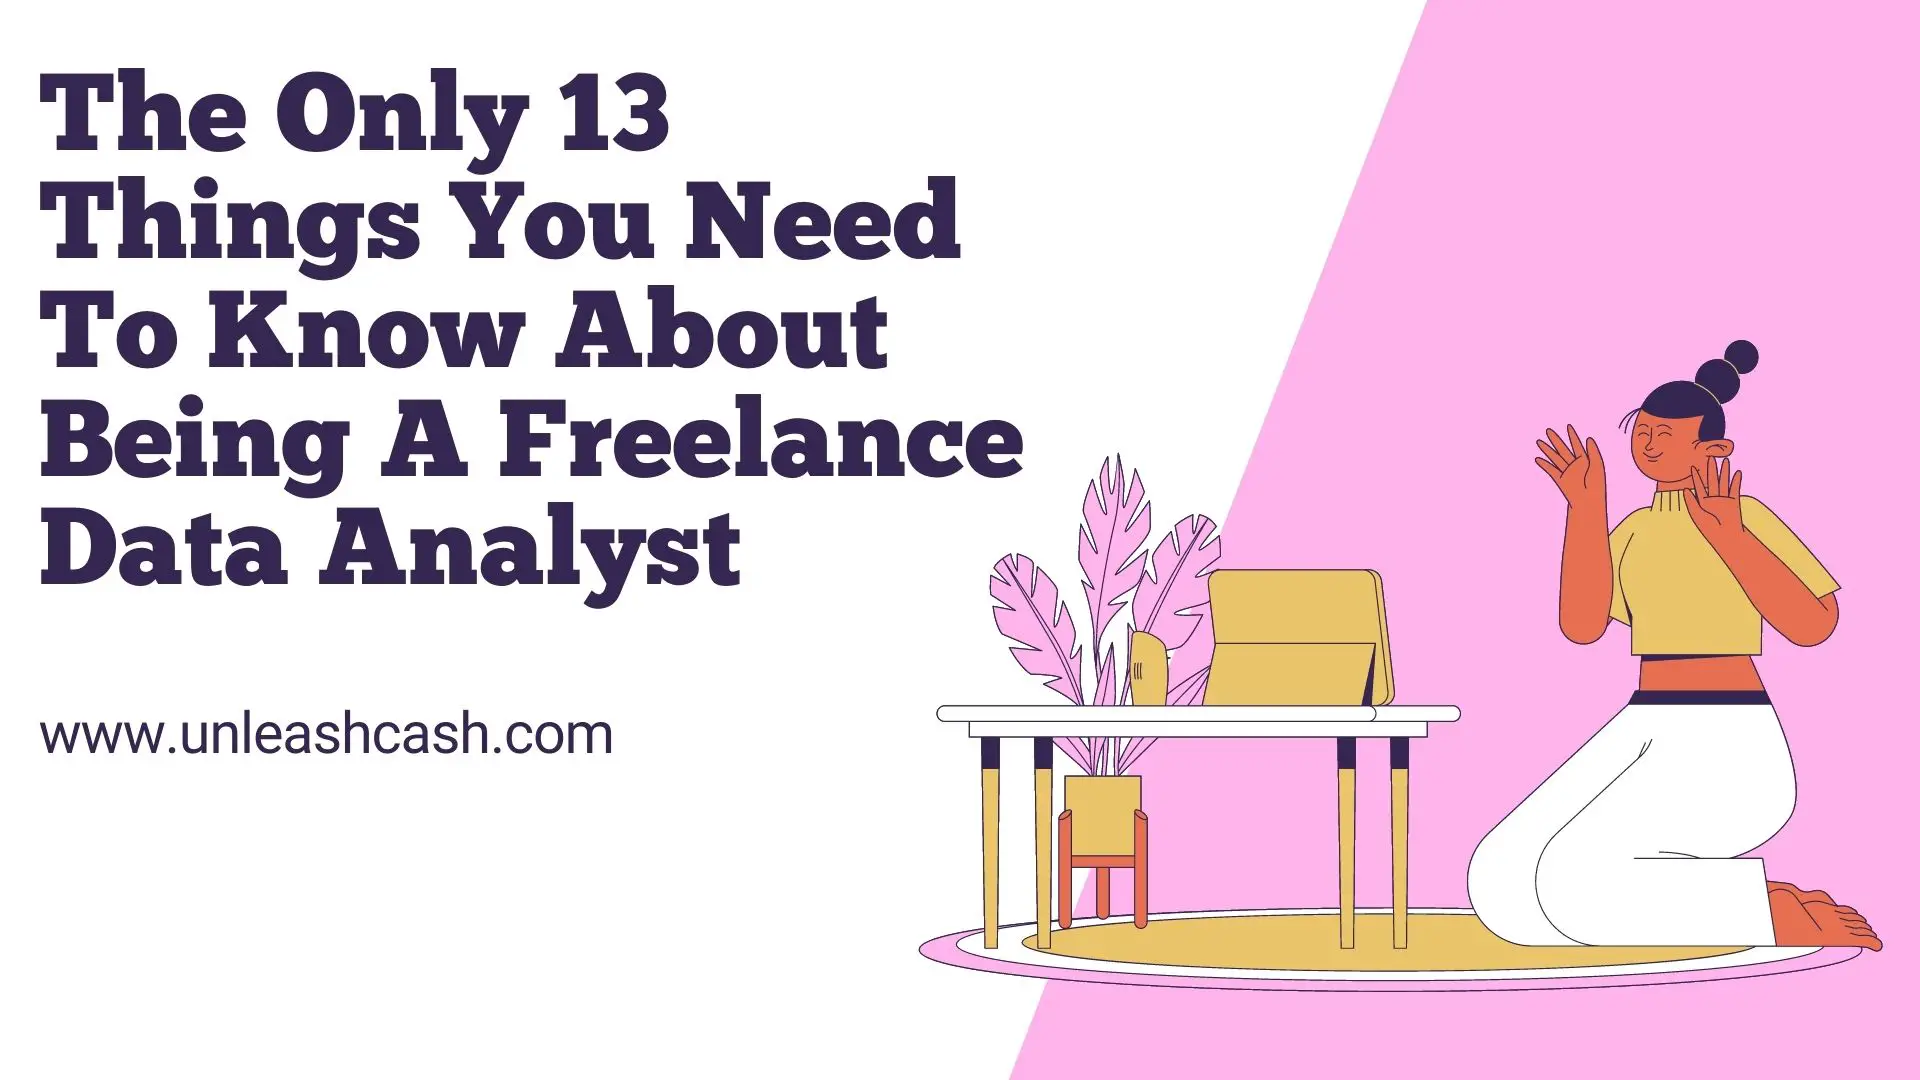 The Only 13 Things You Need To Know About Being A Freelance Data Analyst